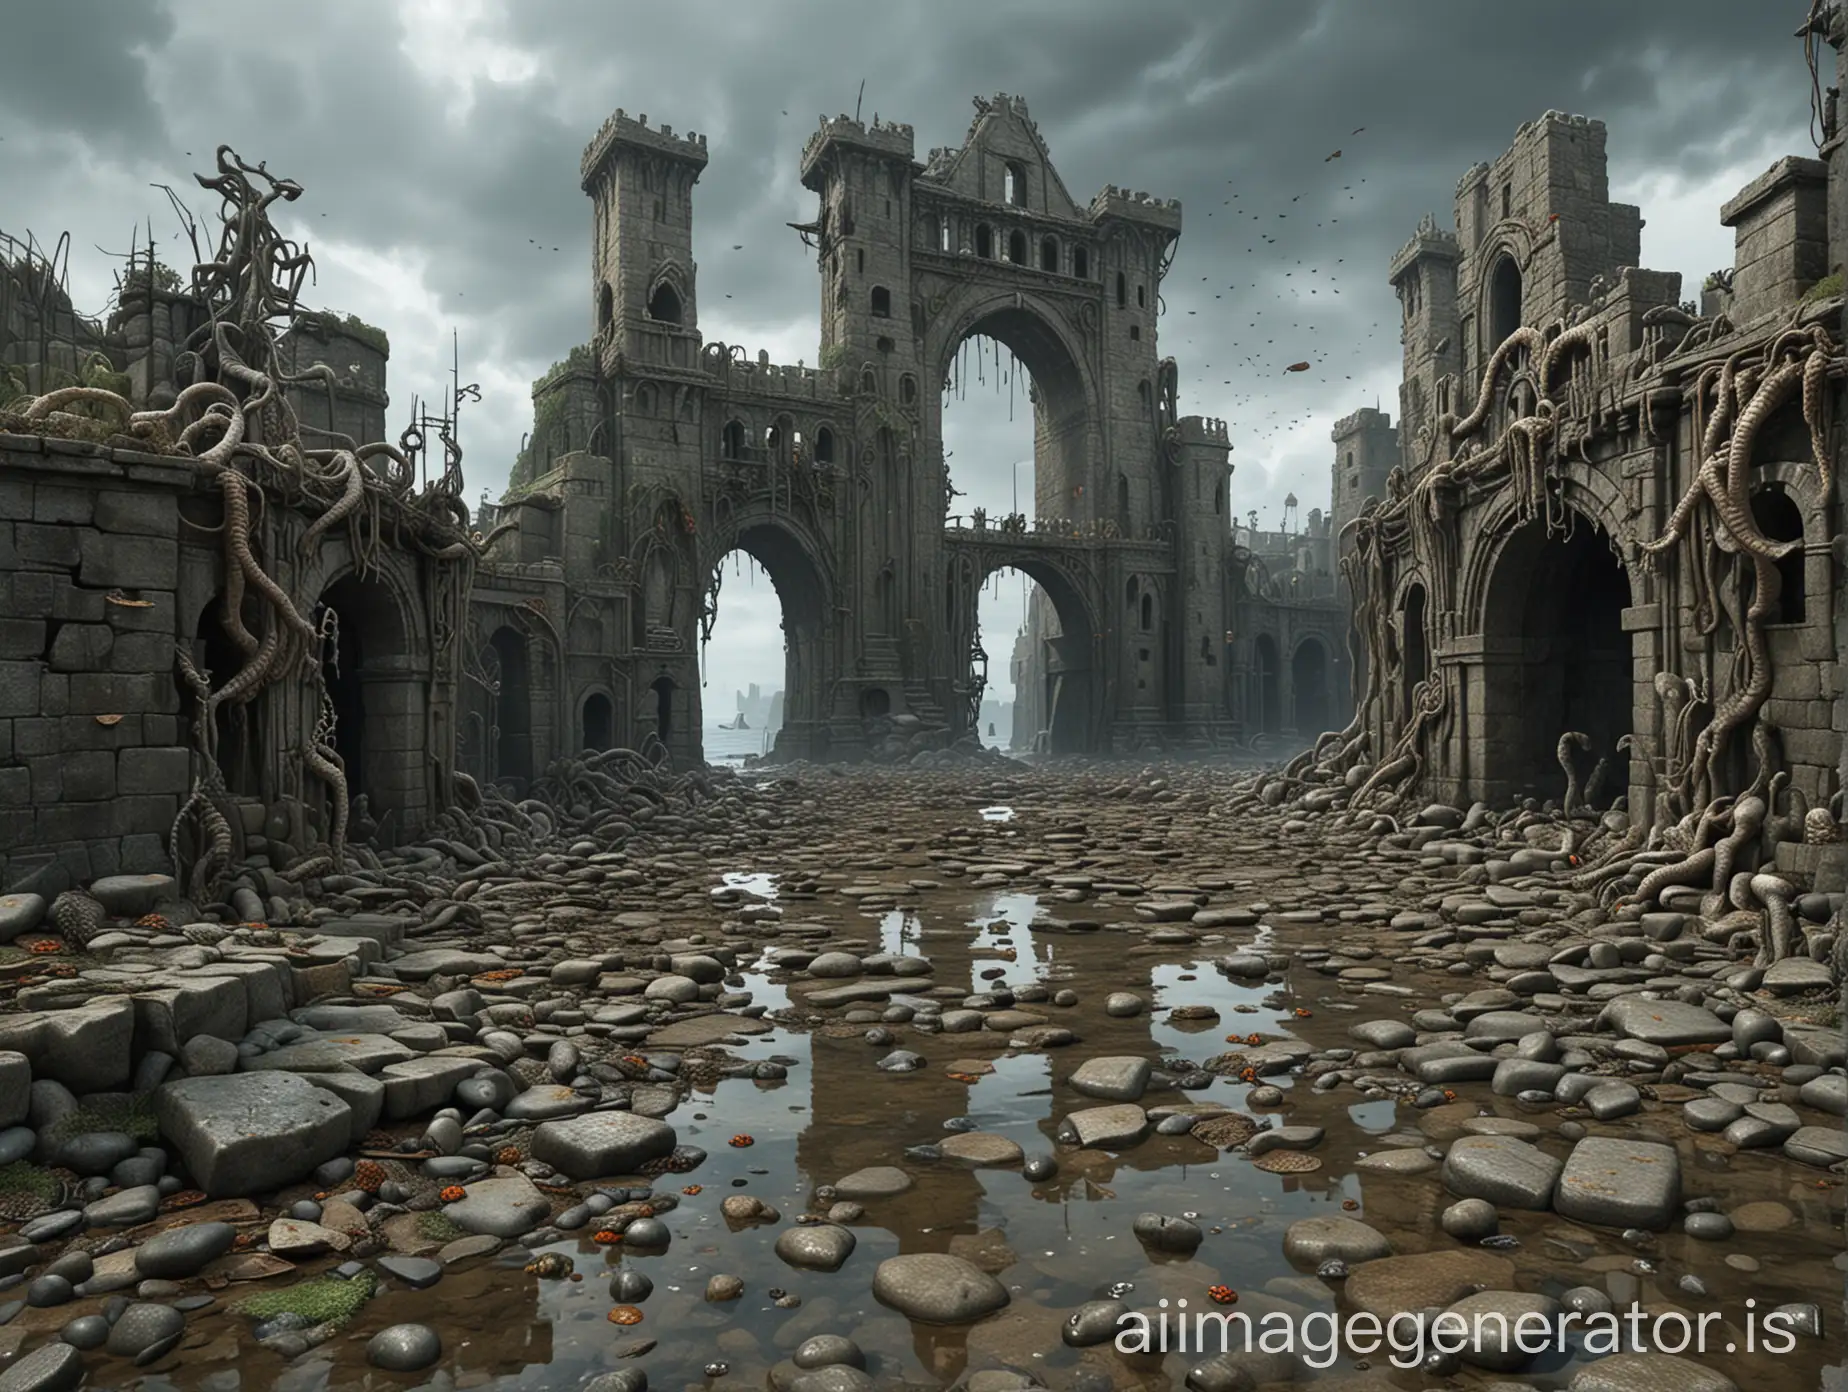 a broken city, half of the city is in the sea, in the center of the city there is a huge stone gate, with many stony tentacles and strange symbols on it, on the right side there is a nearly collapsed stone tower. The ground is full of slime and dead fish, and the weather is cloudy